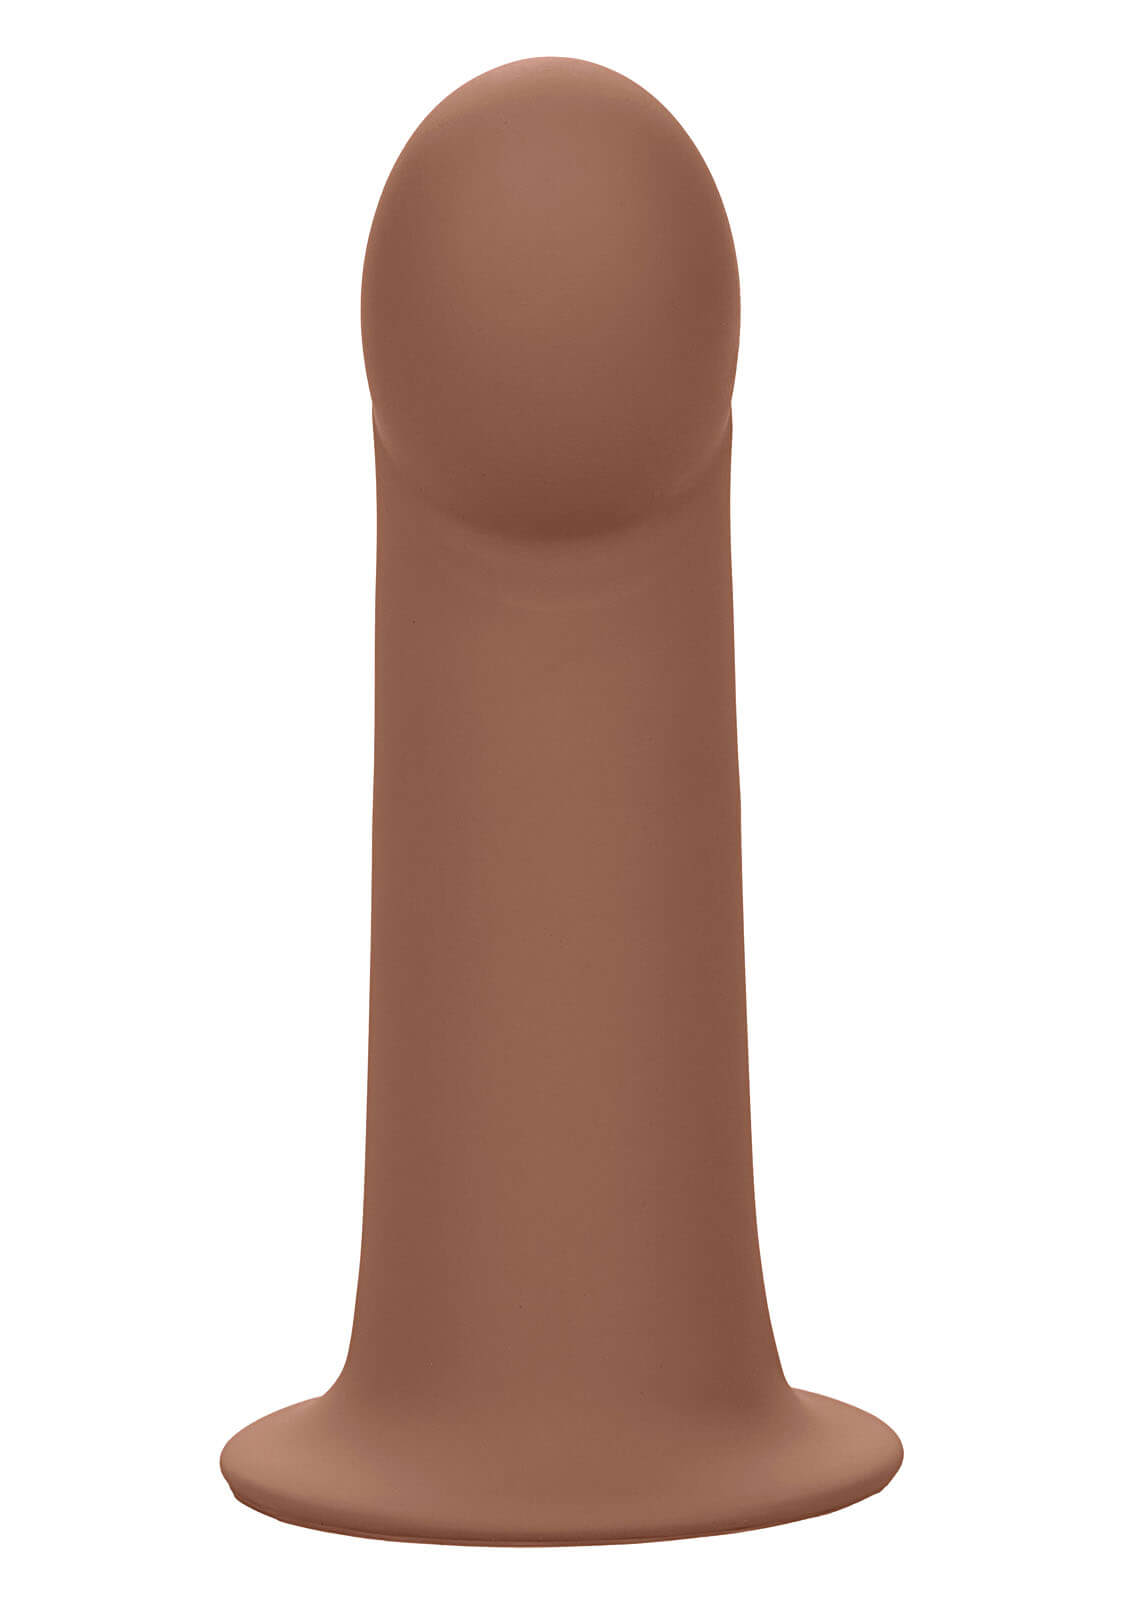 Strap on penis CalExotics Maxx Extension with Harness (Brown)